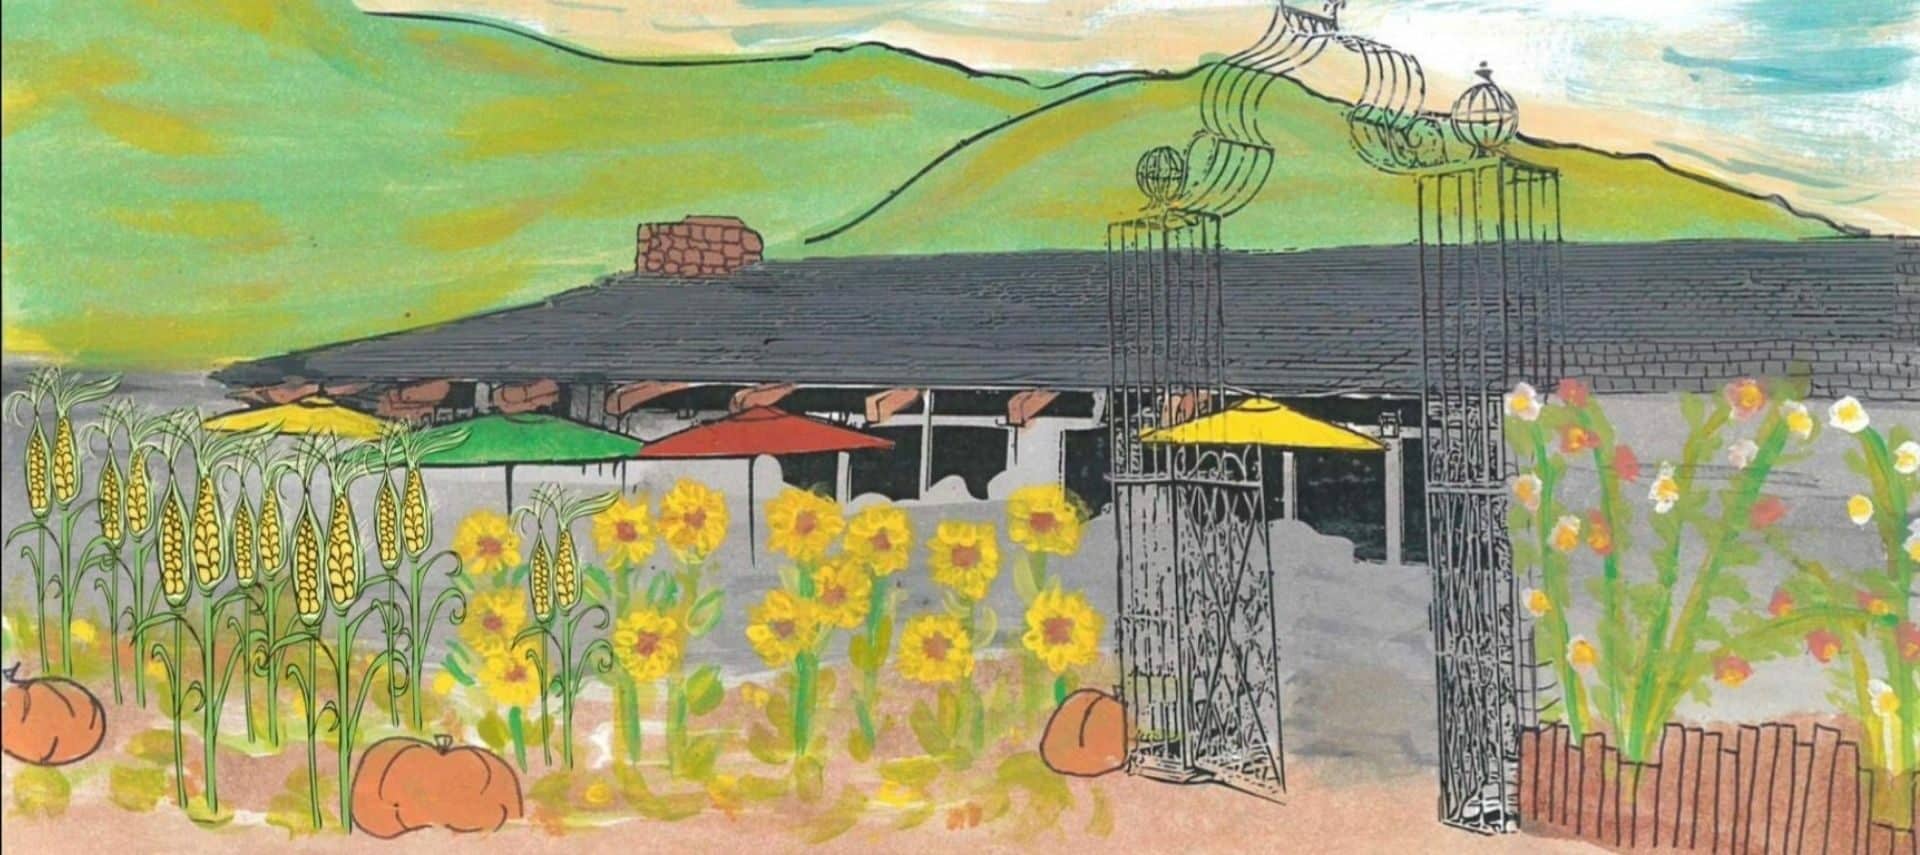 Watercolor drawing of building with mountains in the background and flowers in the front